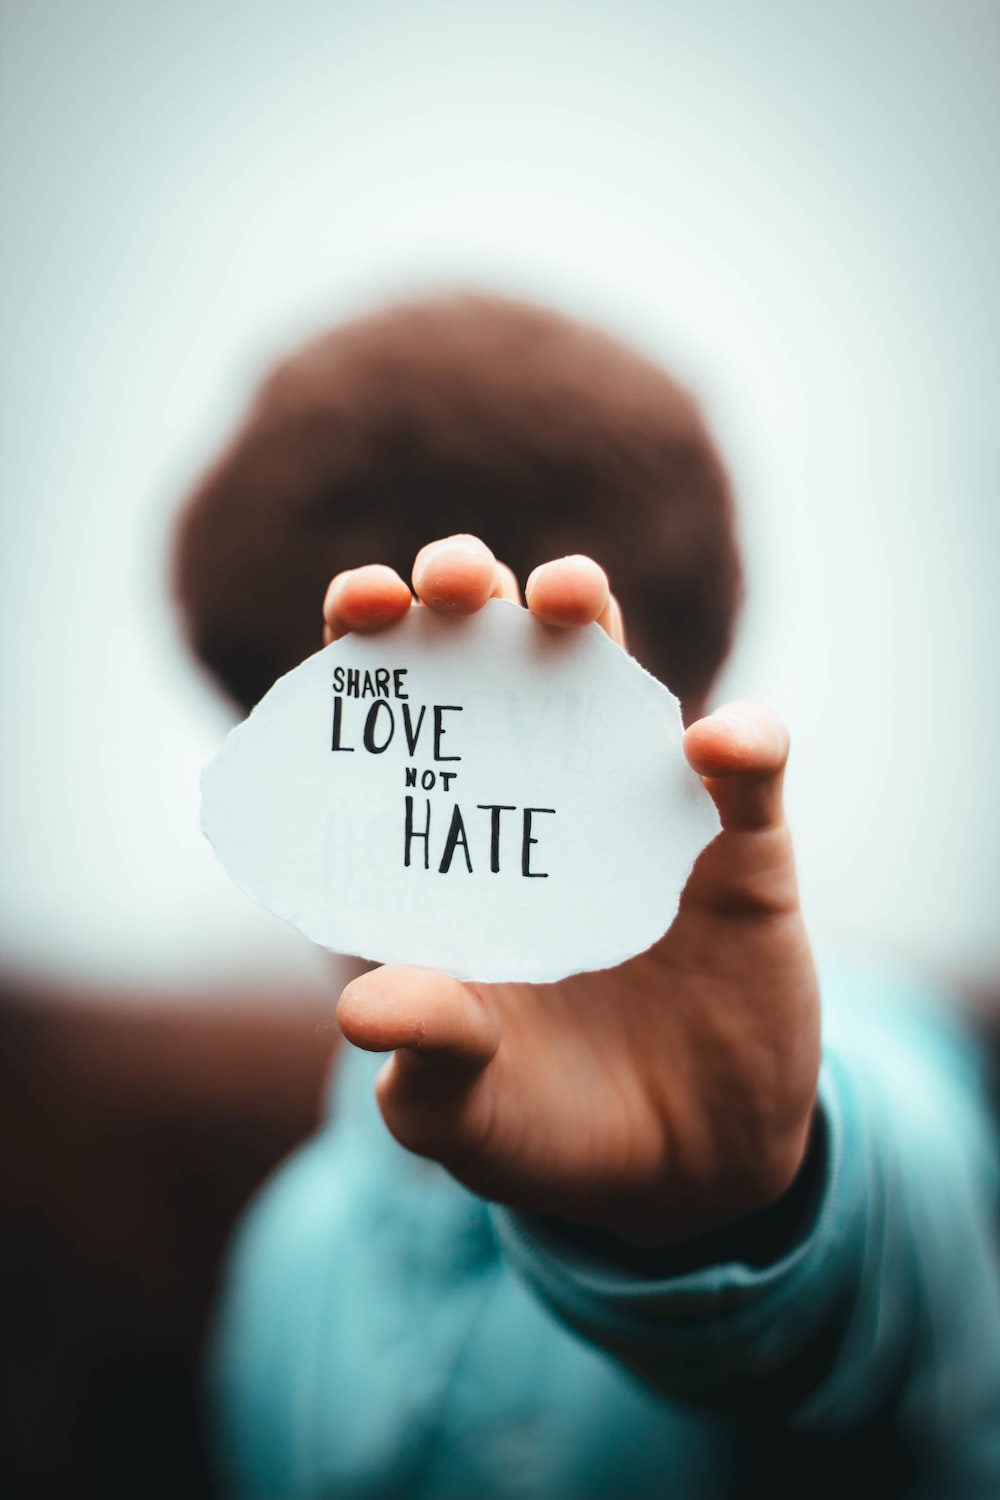 Love hate pictures download free images on